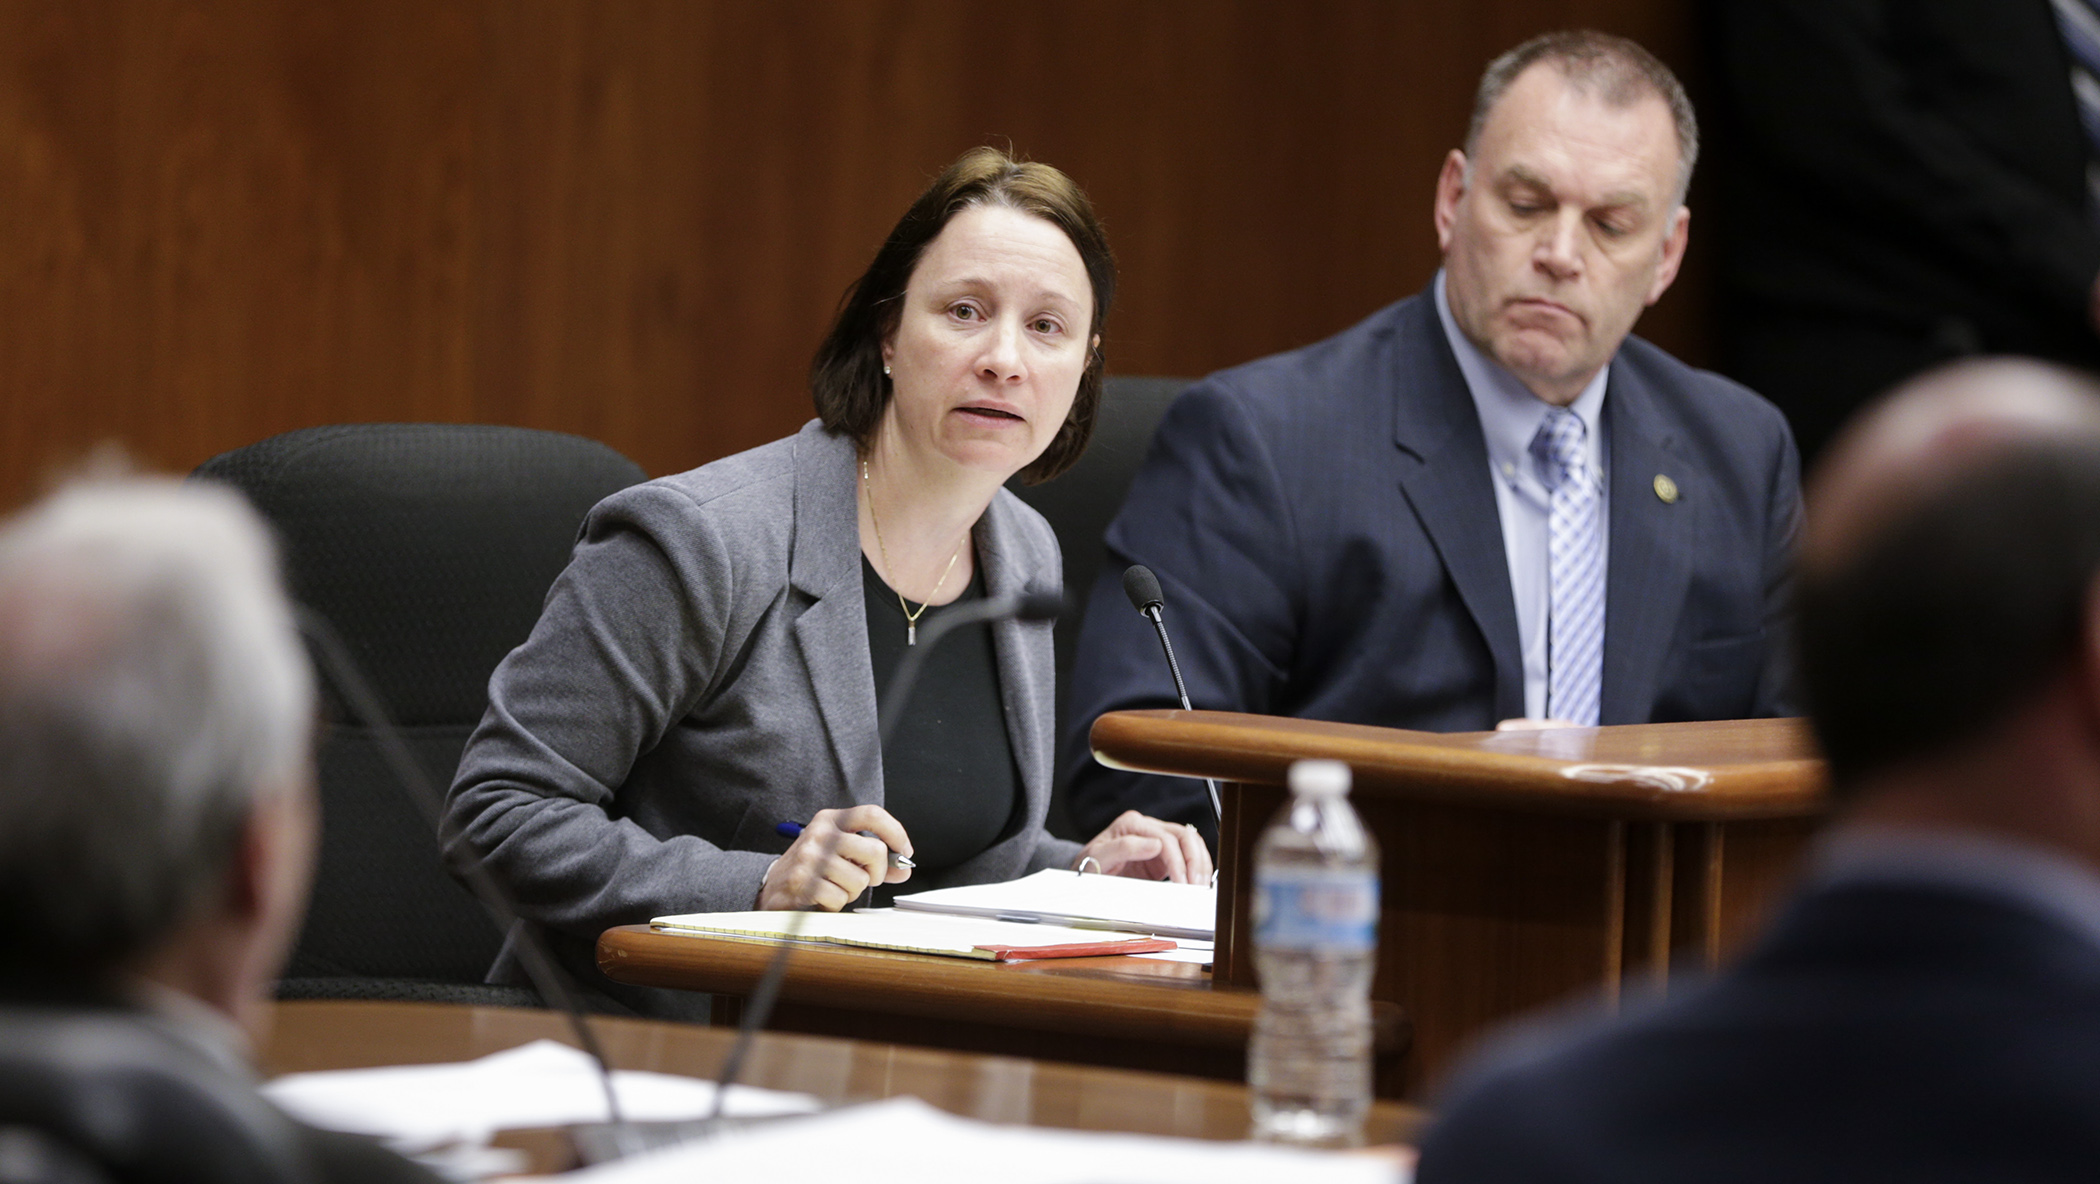 MN.IT Commissioner Johanna Clyborne responds to a question during March 6 testimony on HF3147, presented by Rep. Dave Baker, right, which would provide $10 million to MNLARS. Photo by Paul Battaglia